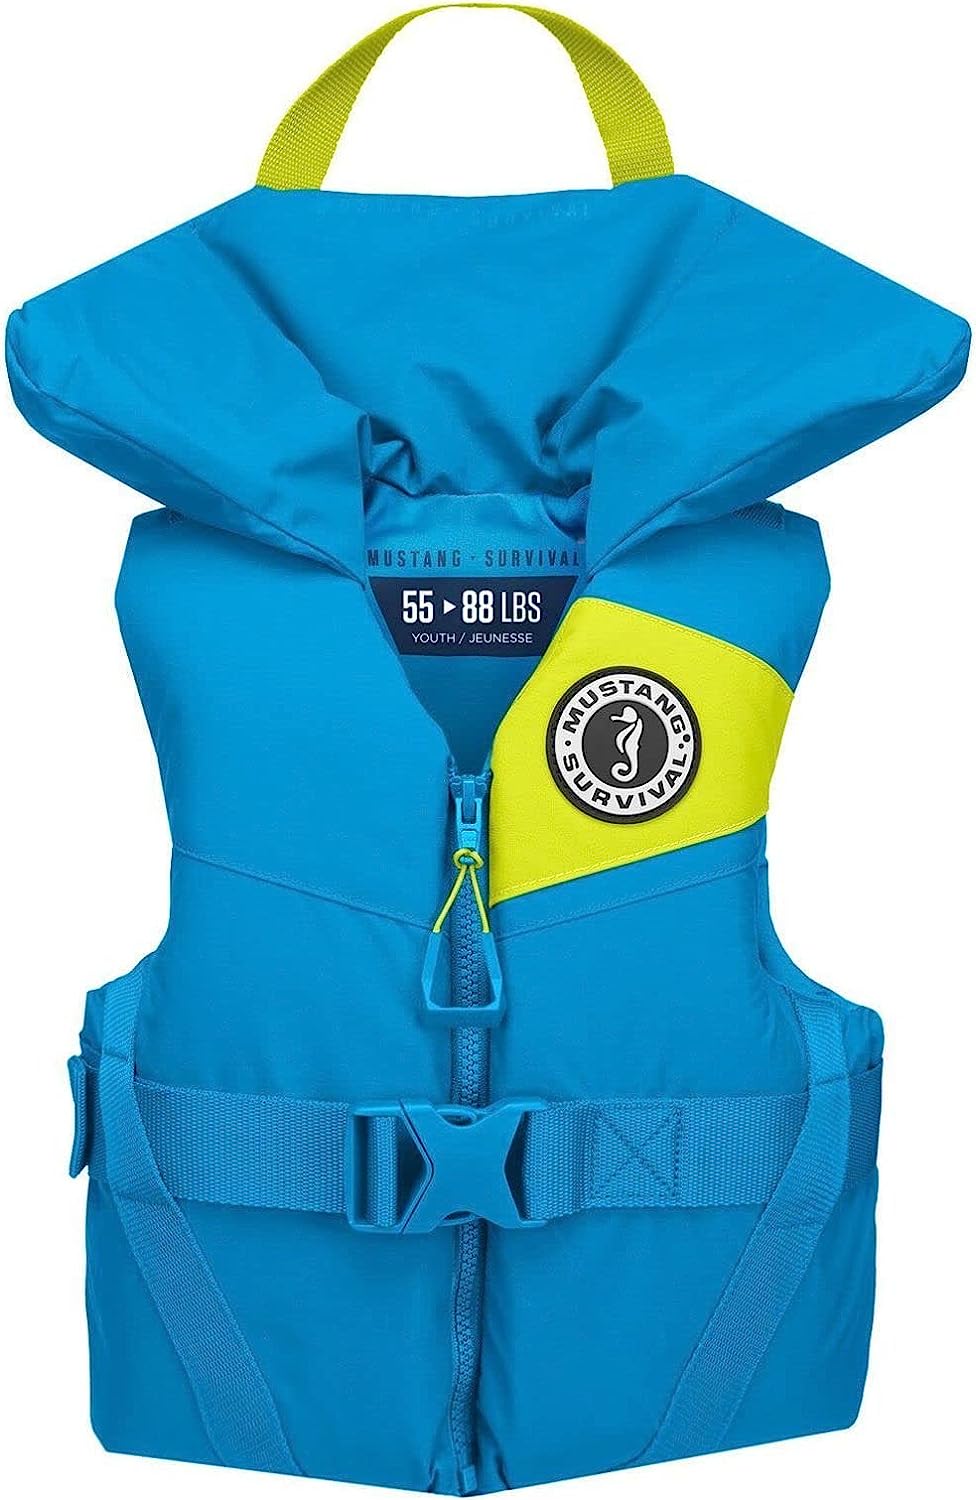 Mustang Survival – Youth Foam PFD – Azure Blue, Youth (55 lbs – 88 lbs)